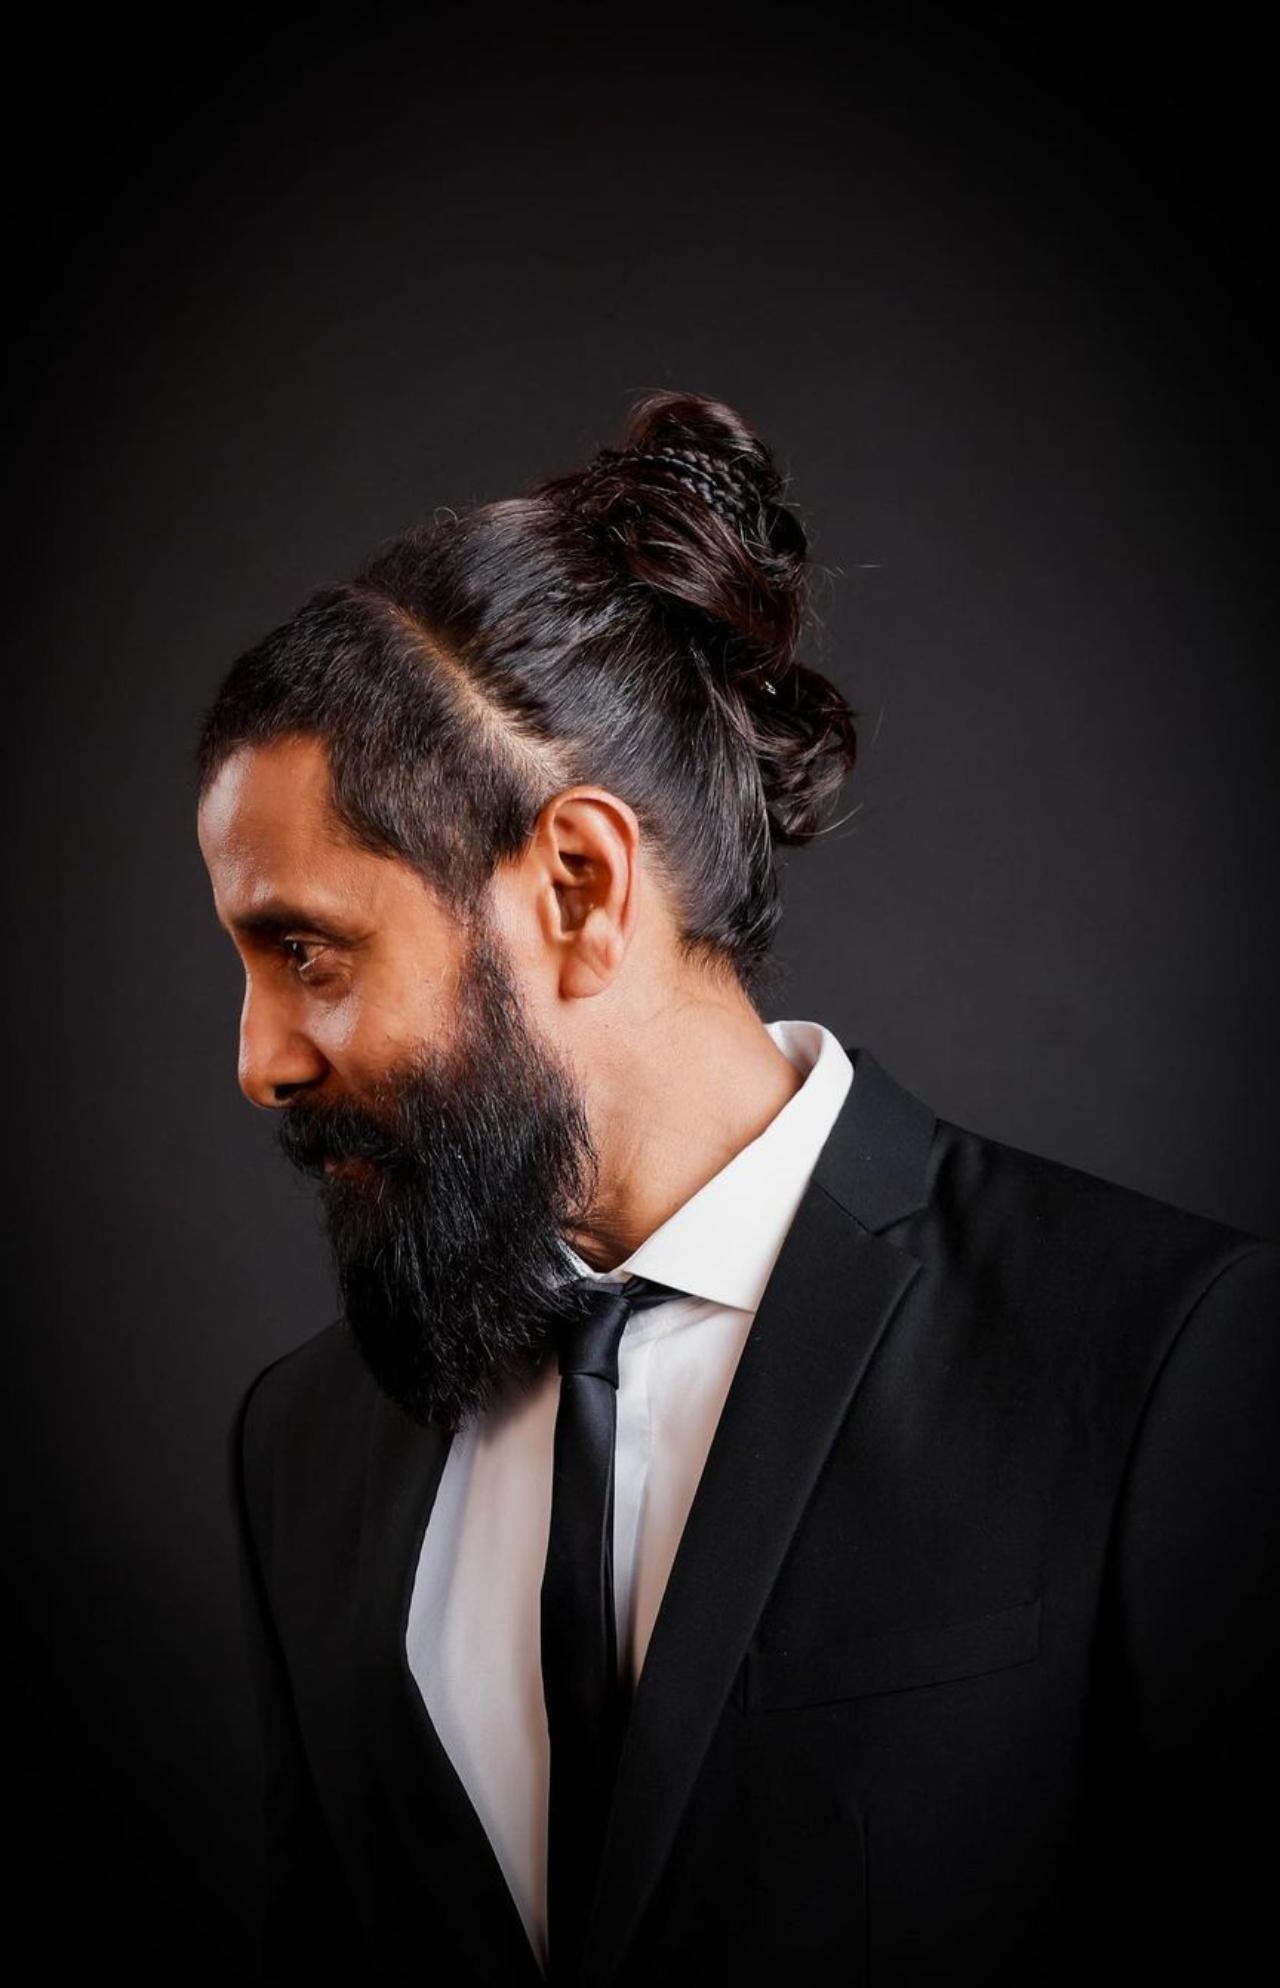 A week ago, Vikram shared this black-tie look with his hair innovatively tied in a bun. He shared the photos with a witty caption, 